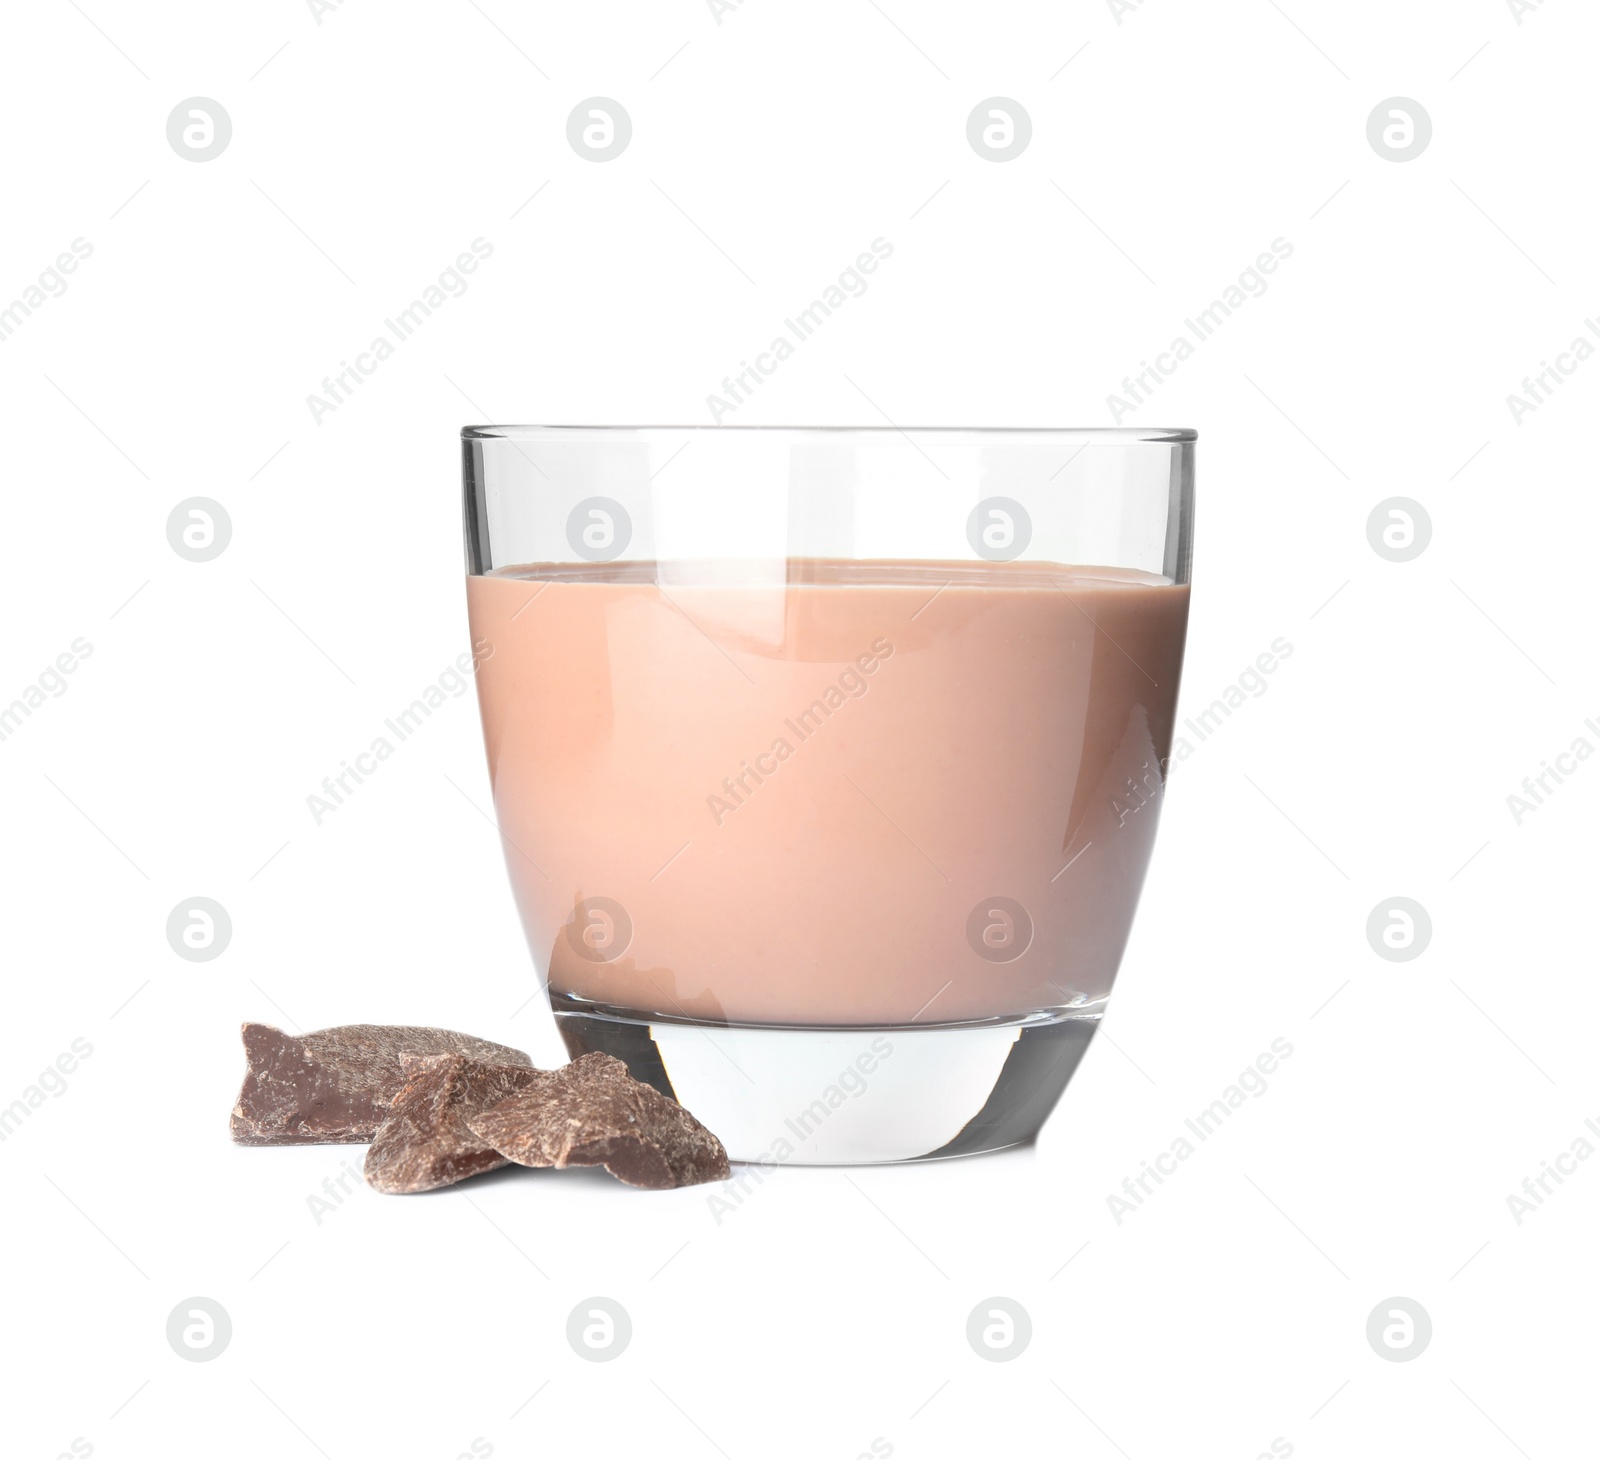 Photo of Glass with tasty chocolate milk on white background. Dairy drink